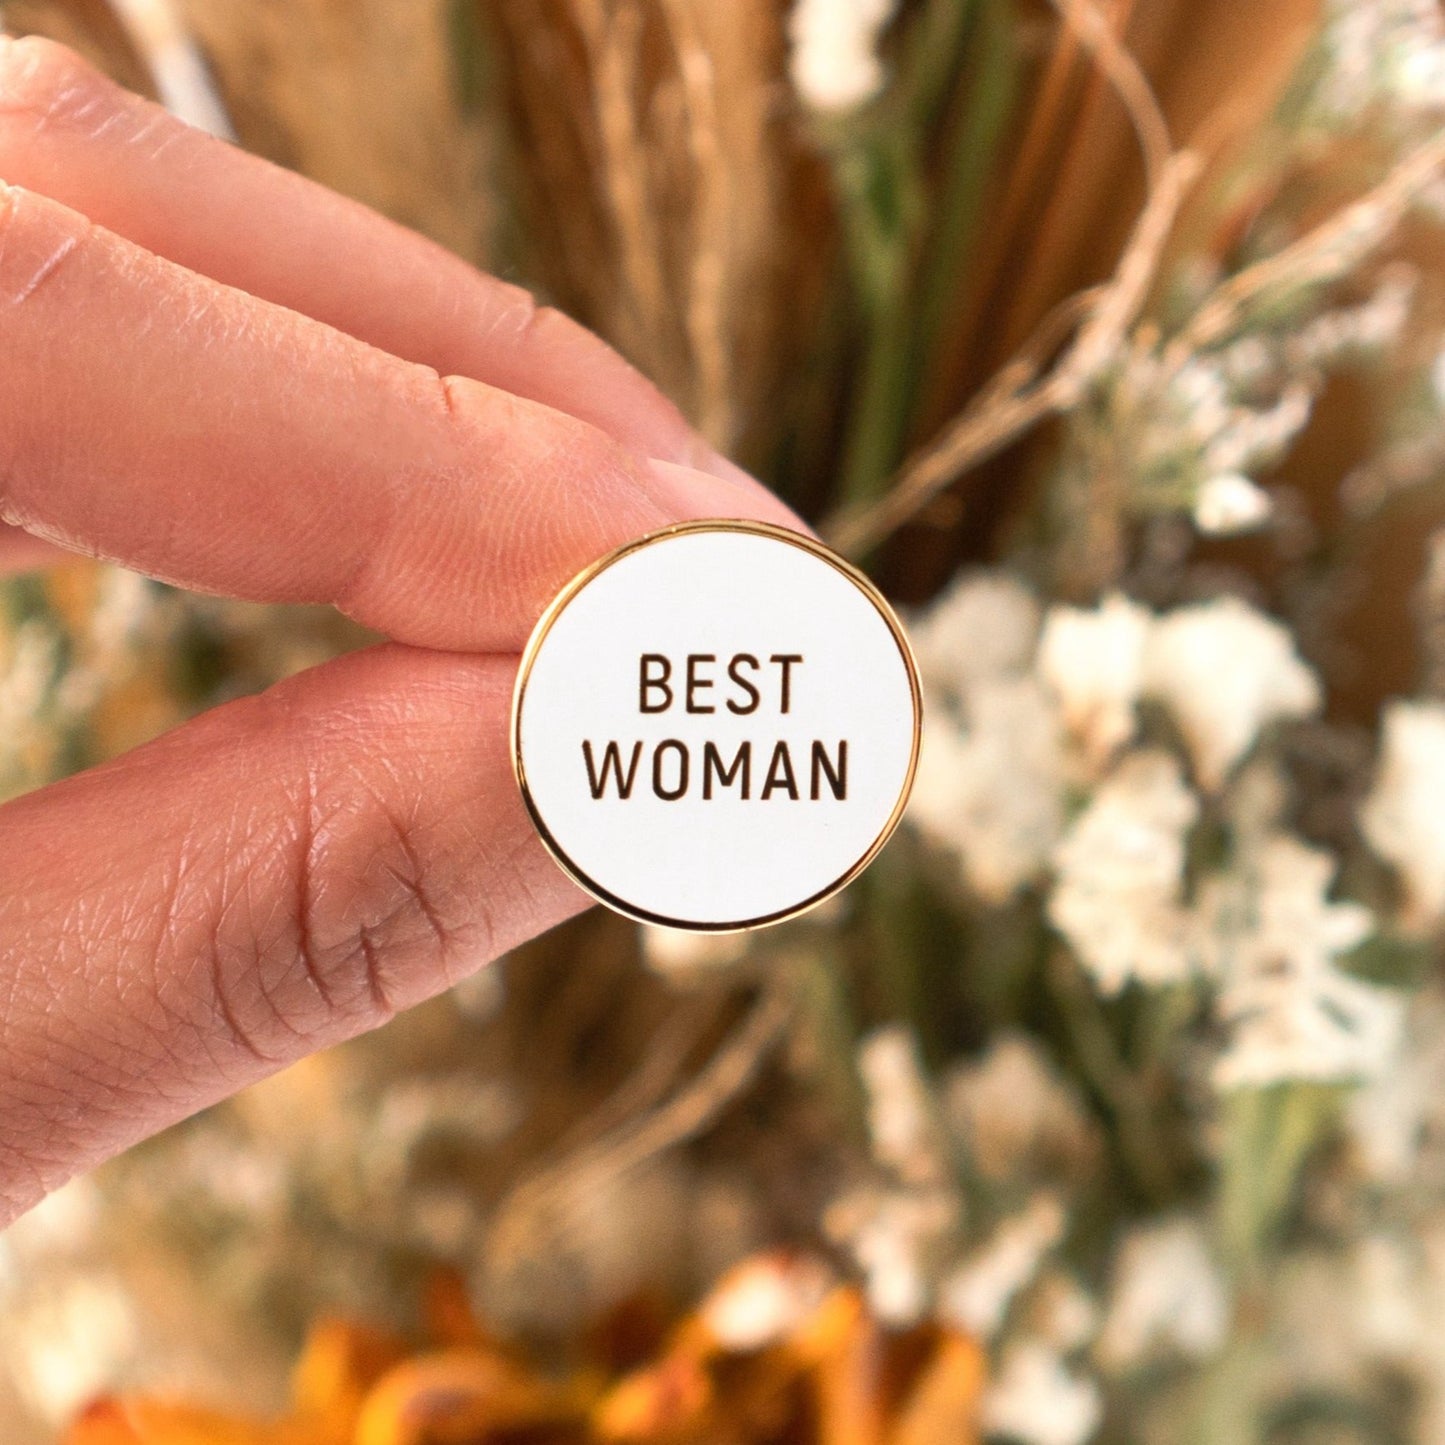 Best Woman Pin | Palm and Posy